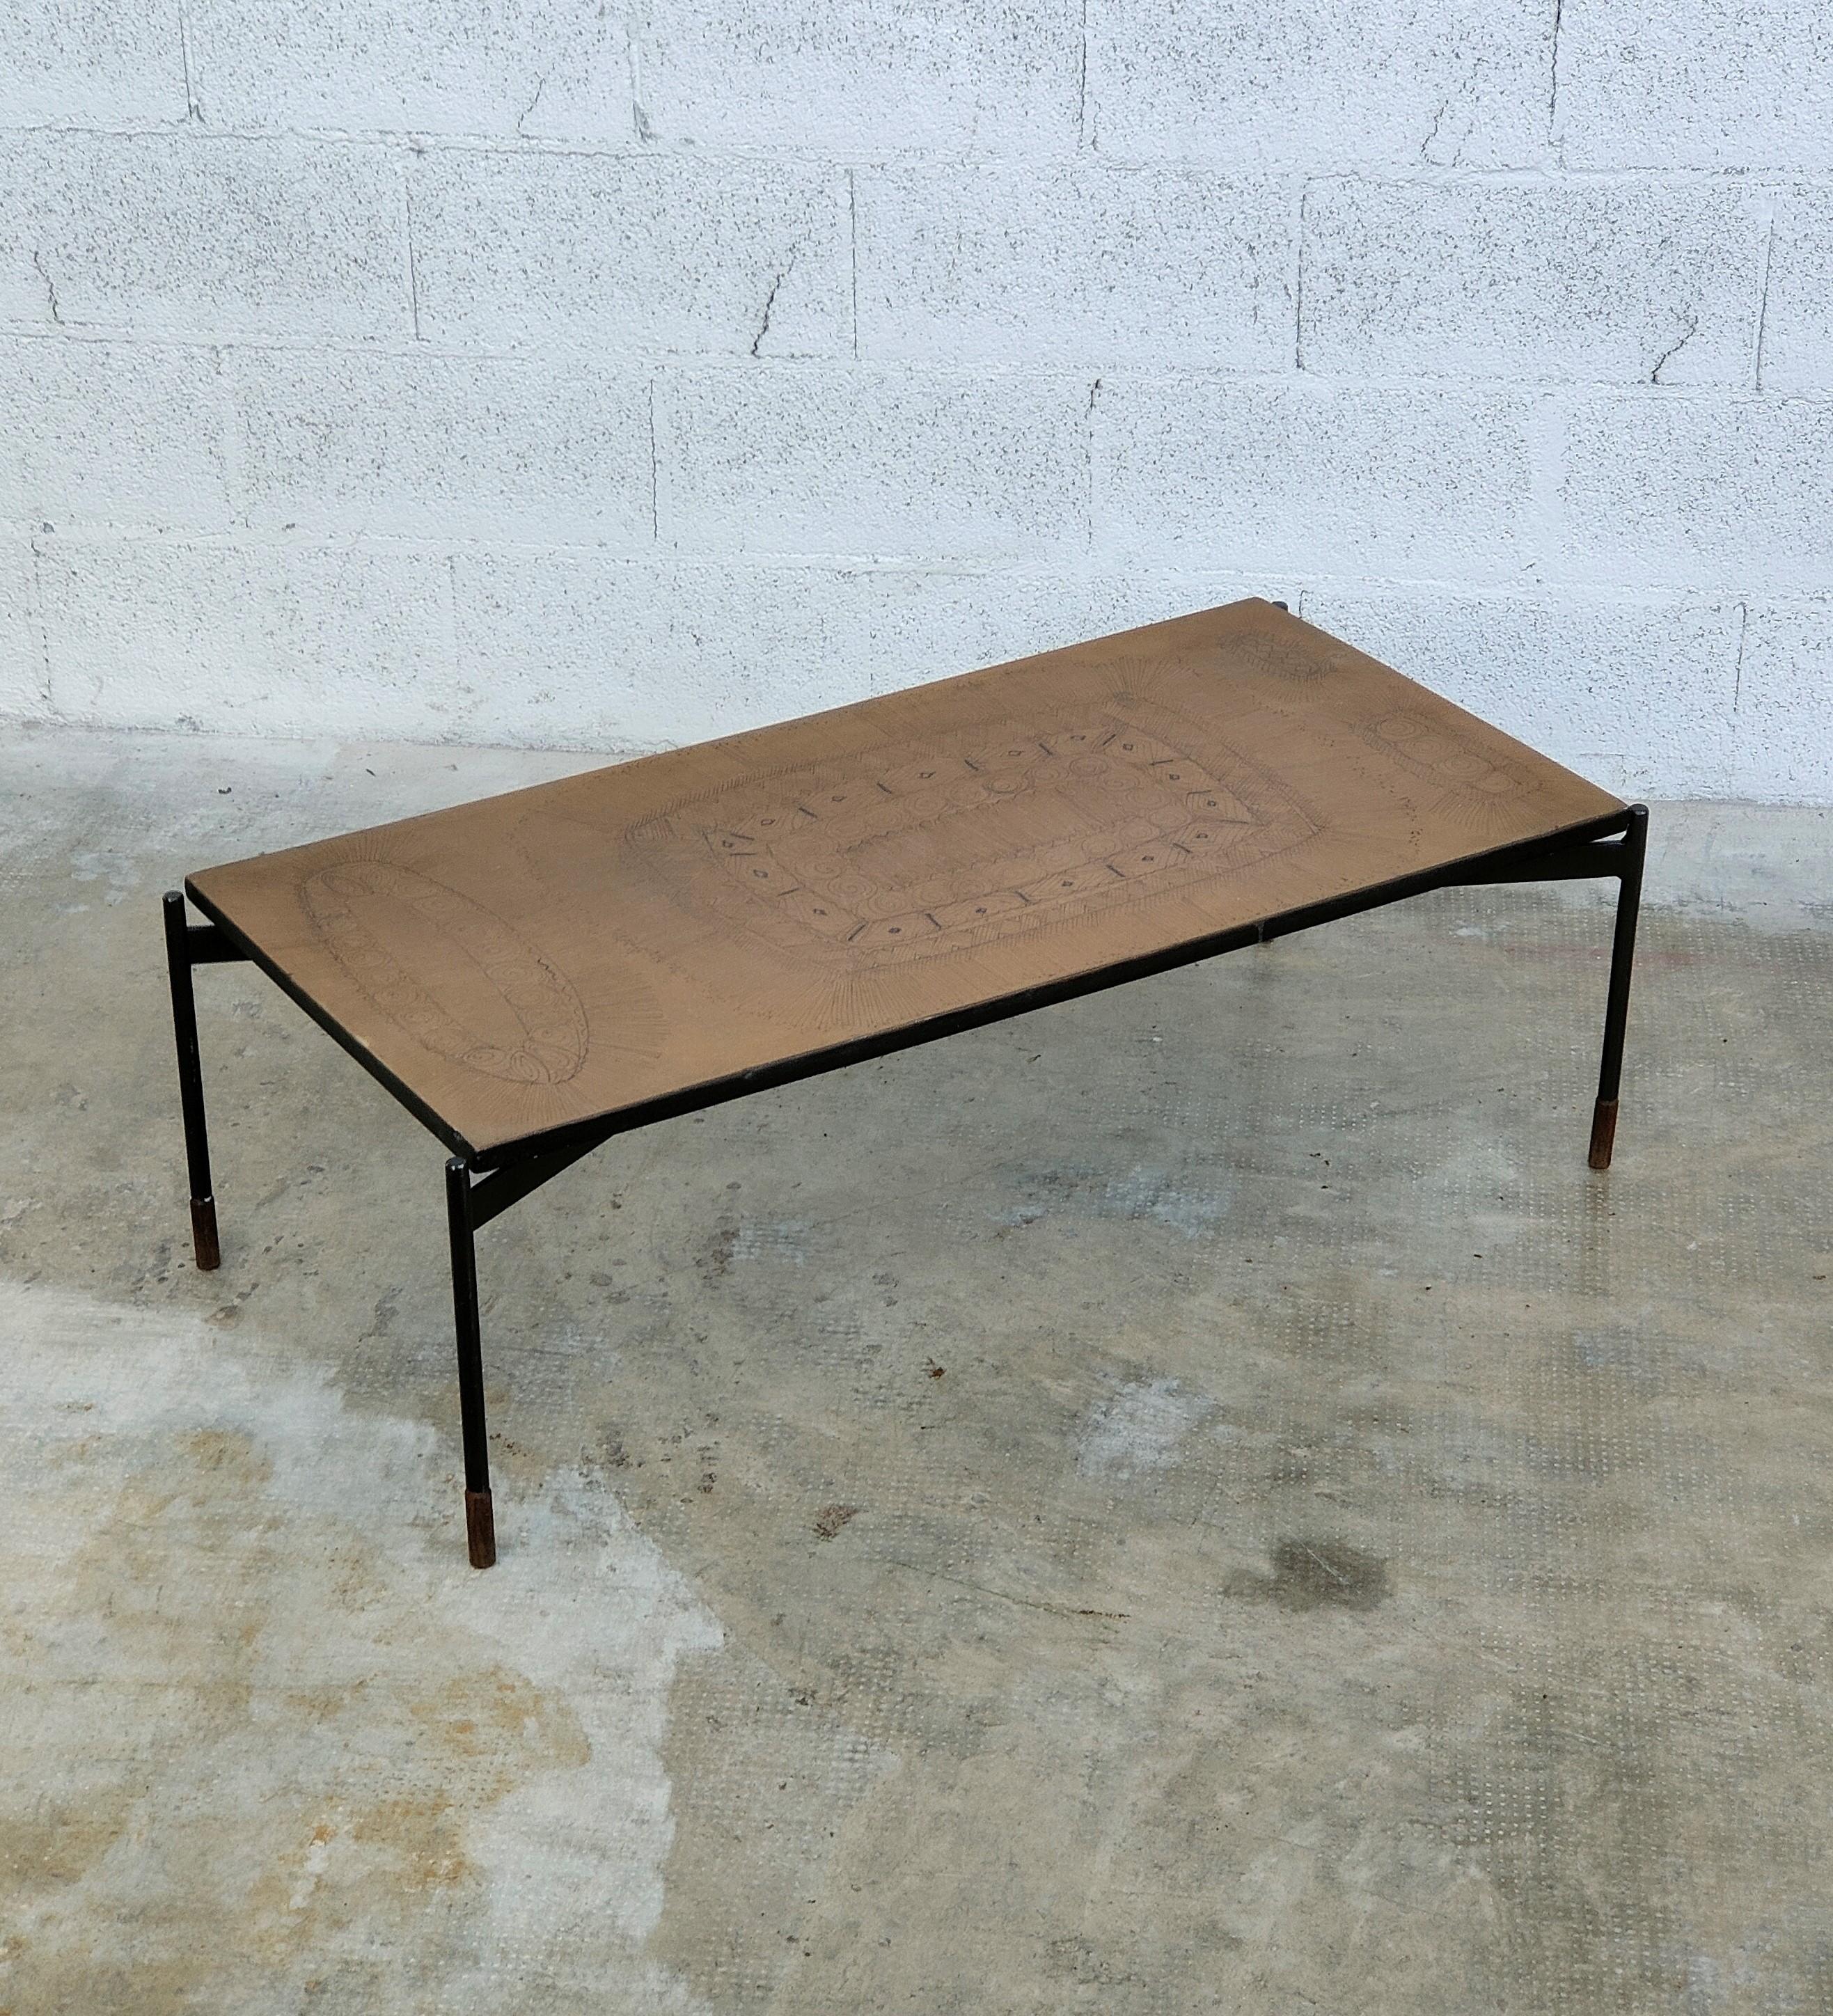 Stunning and unique coffee table made by Stil Keramos, Padova Italy in 1960s.
A decorated ceramic top laid on a black metal vernished frame.
Note the refinement of the wooden feet of the metal frame.

The 